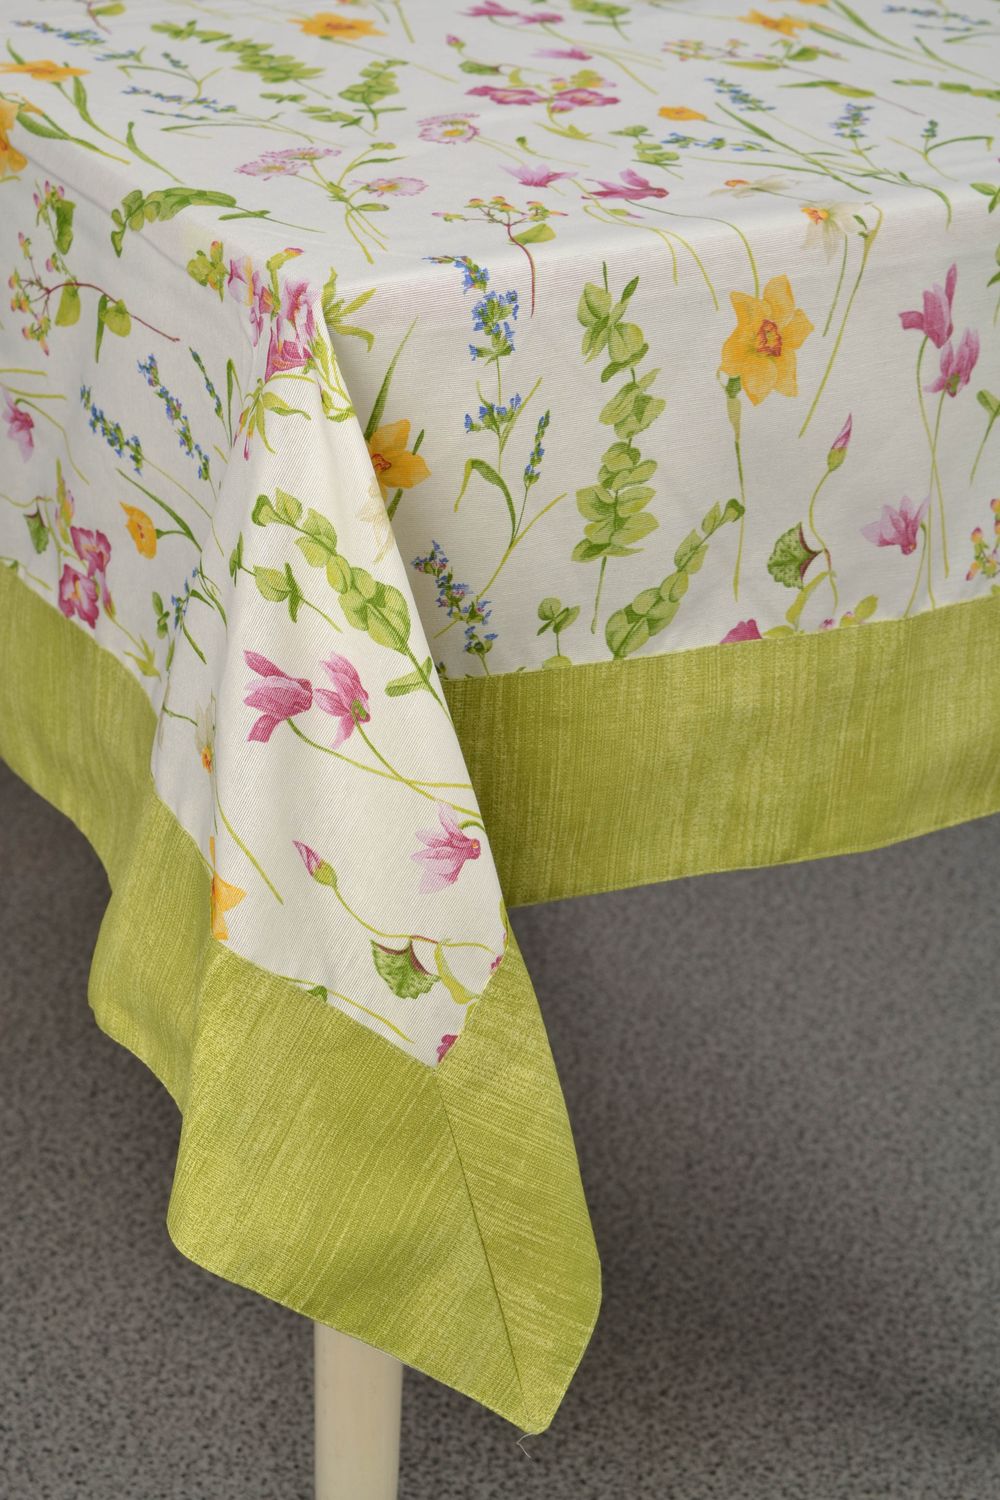 Large floral tablecloth photo 3